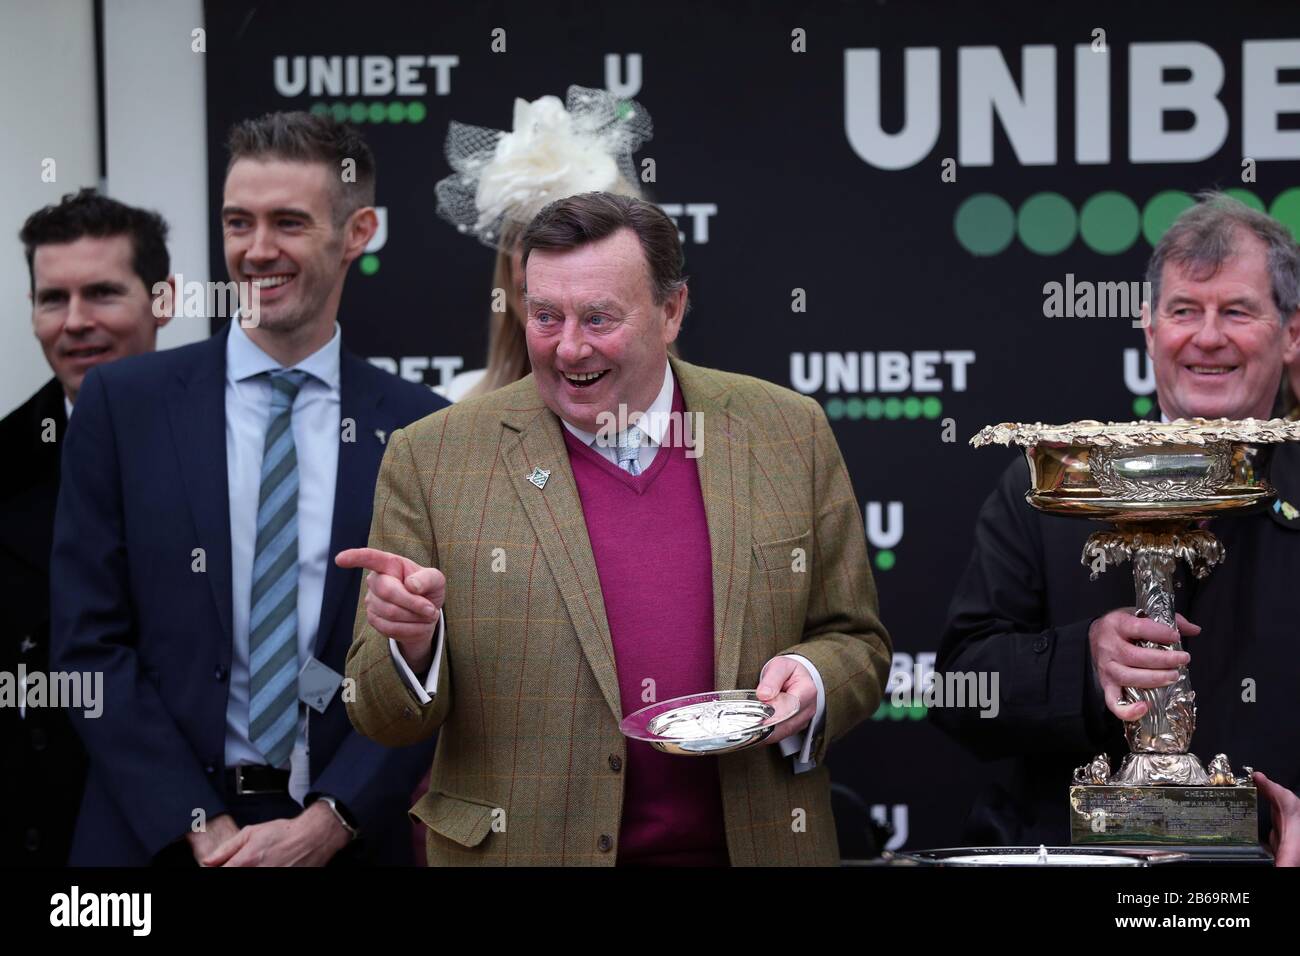 Trainer of Epatante, Nicky Henderson following victory in the Unibet Champion Hurdle Challenge Trophy on day one of the Cheltenham Festival at Cheltenham Racecourse, Cheltenham. Stock Photo